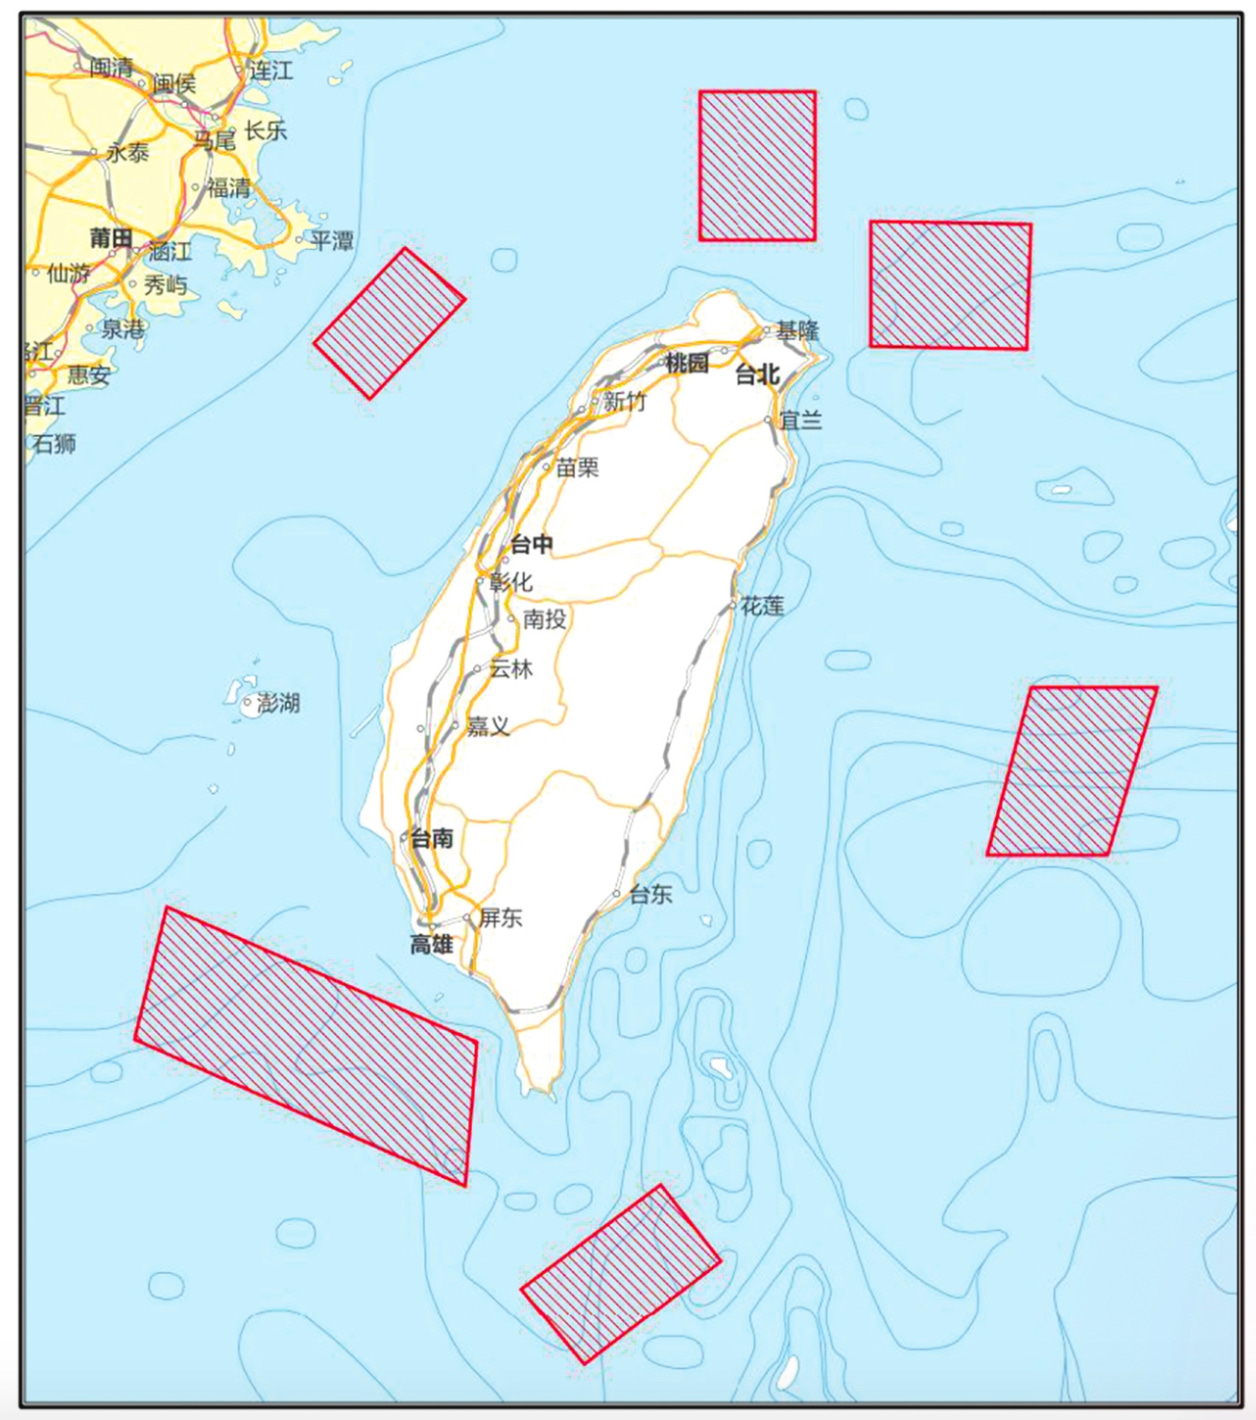 The locations of the Chinese naval fleet around Taiwan conducting live fire exercises August 4-7